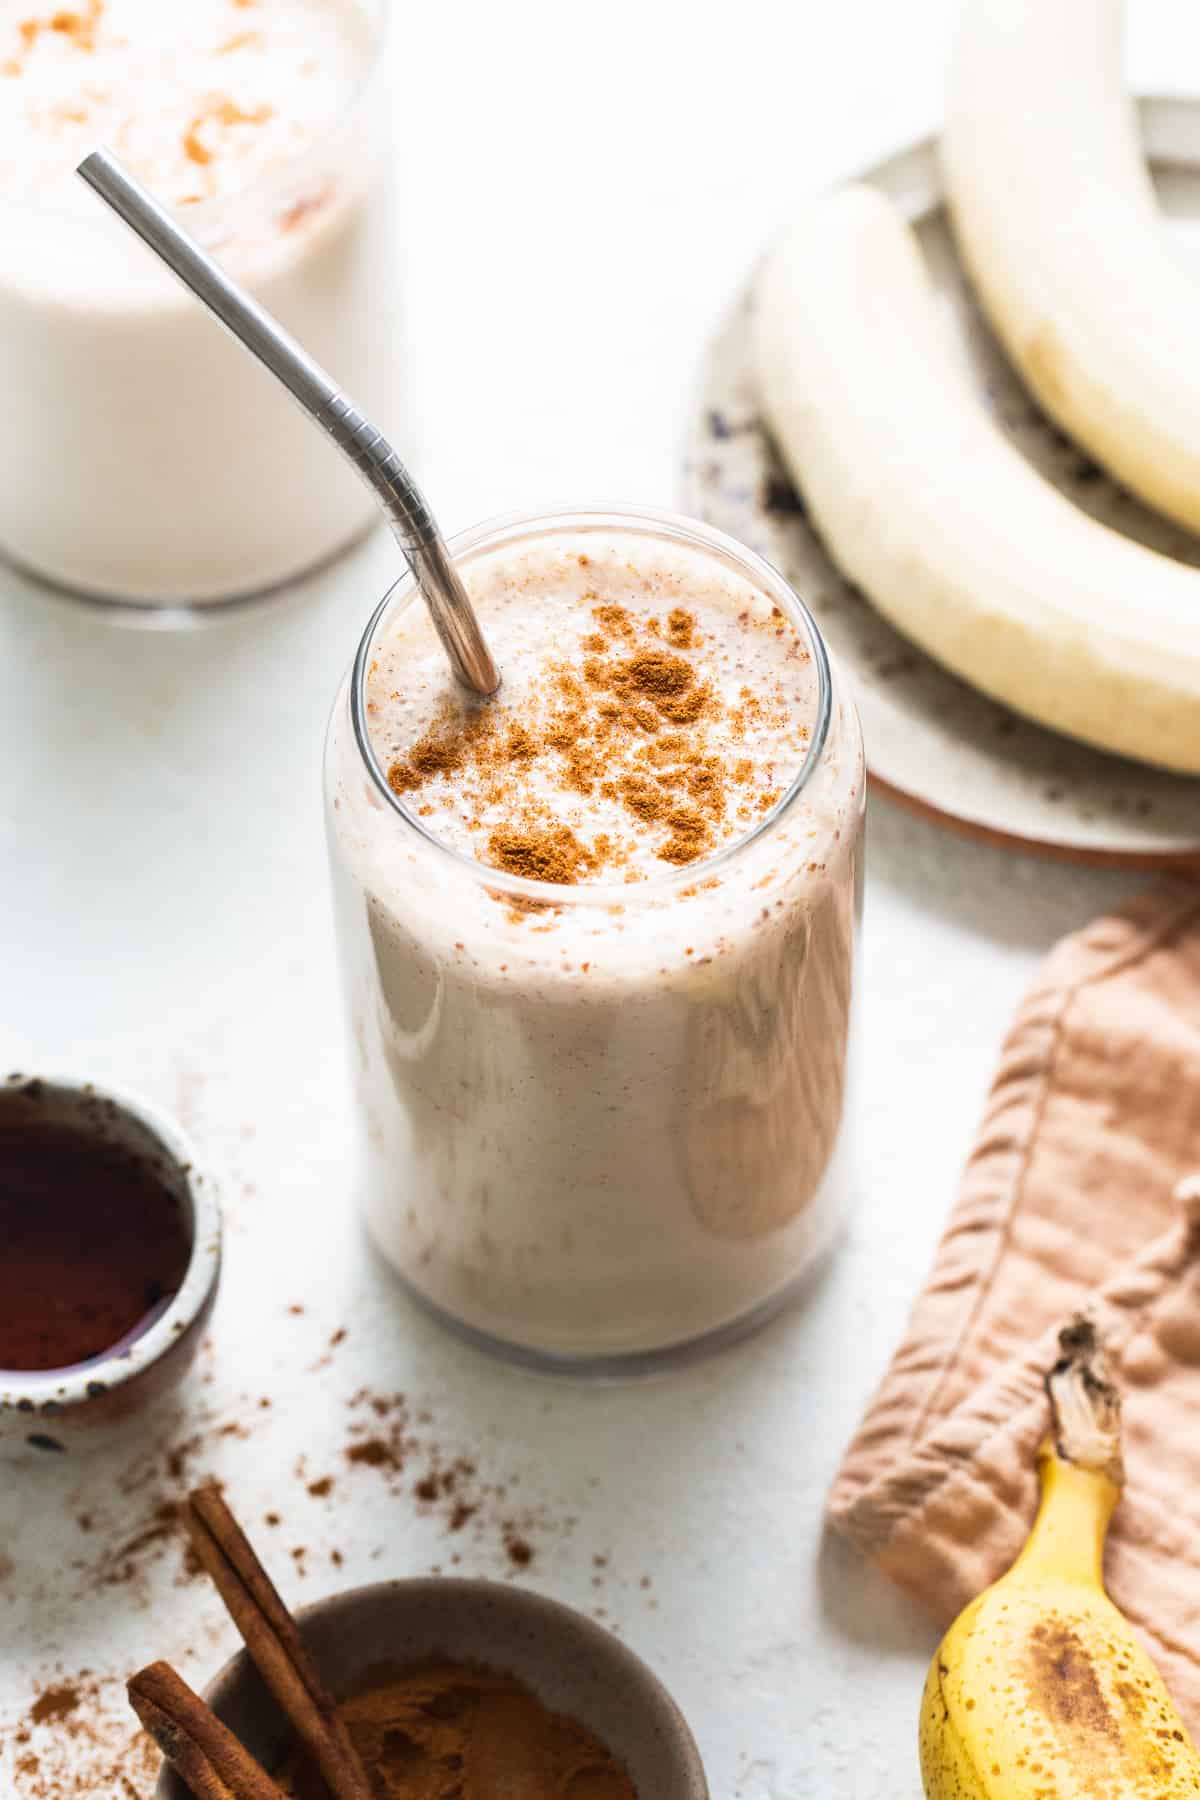 A licuado de platano in a glass cup garnished with ground cinnamon